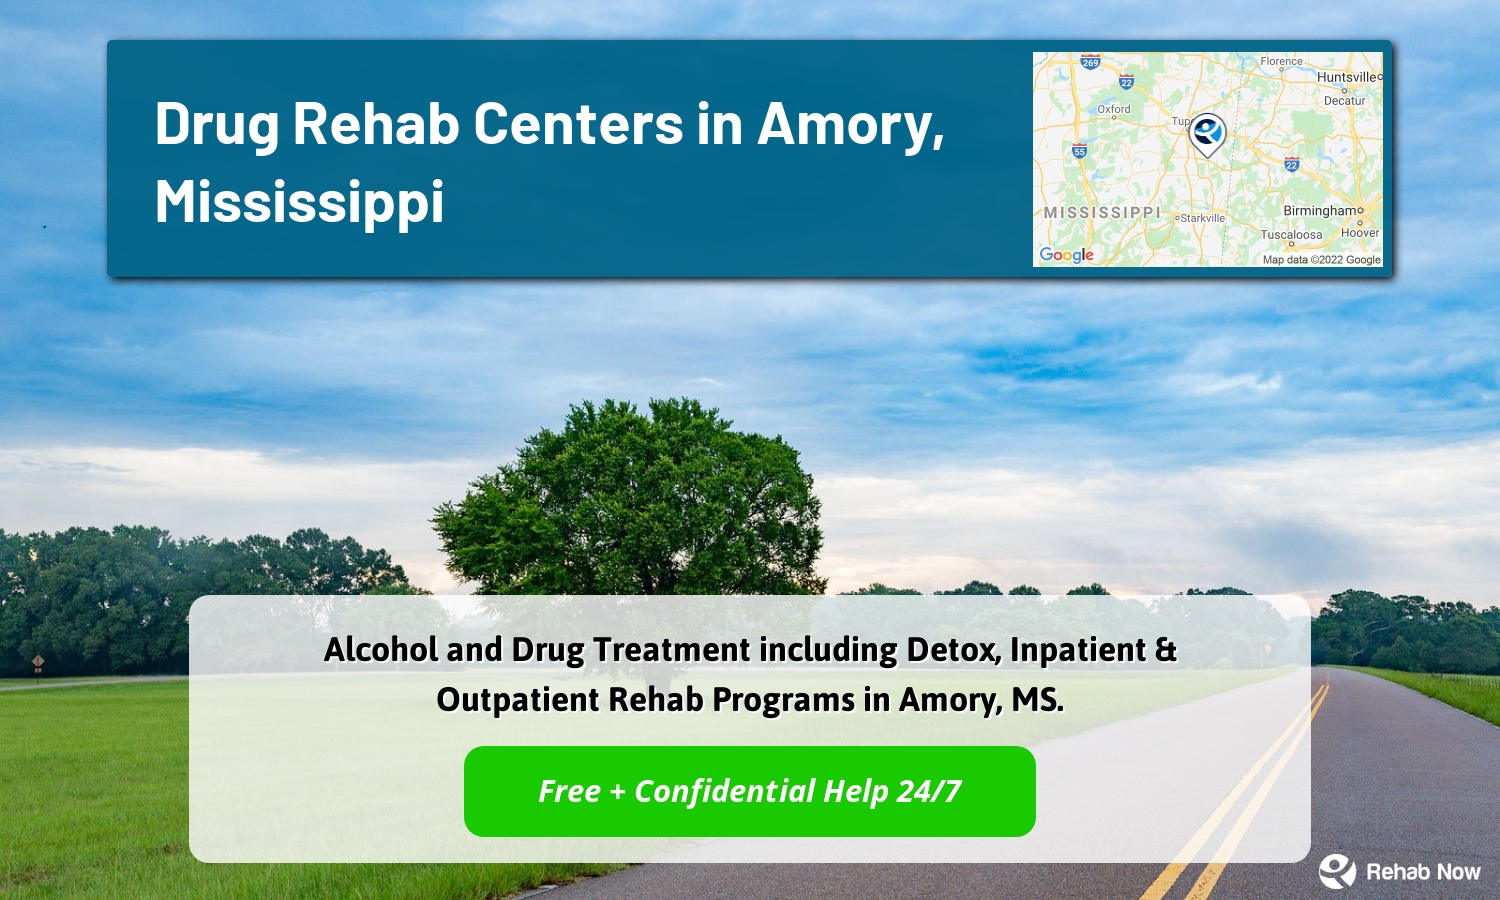 Alcohol and Drug Treatment including Detox, Inpatient & Outpatient Rehab Programs in Amory, MS.